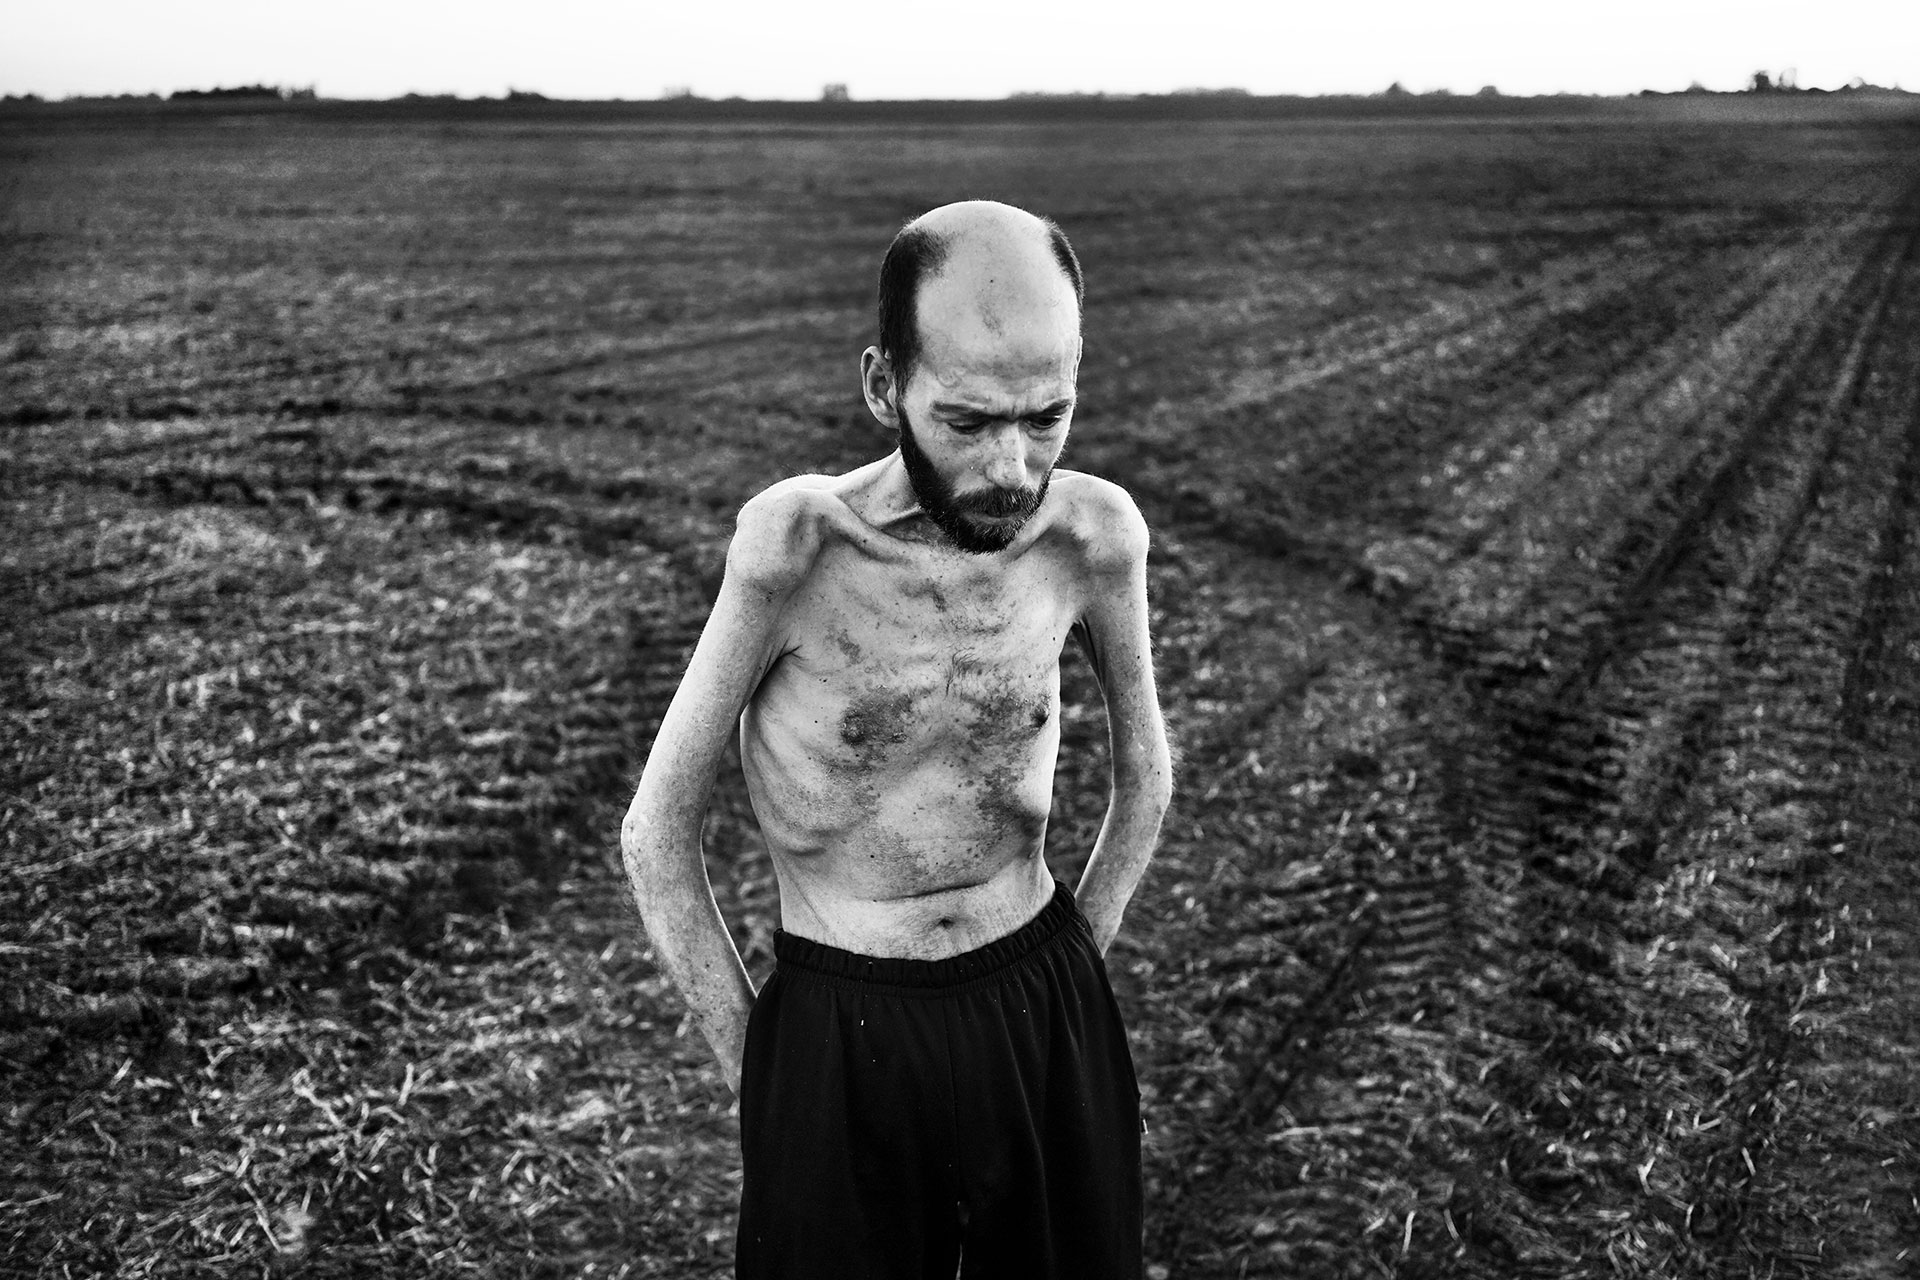 29/10/2016. Entre Ríos, Argentina. For years, Fabián Tomasi worked at loading and pumping jobs for an aerial crop-spraying company. He suffers from severe toxic poly-neuropathy and is currently being treated for general muscular atrophy, which keeps him bed-ridden. Fabián has become a living example of agrochemicals’ impact on human health. He devotes his life to raising awareness of this problem.